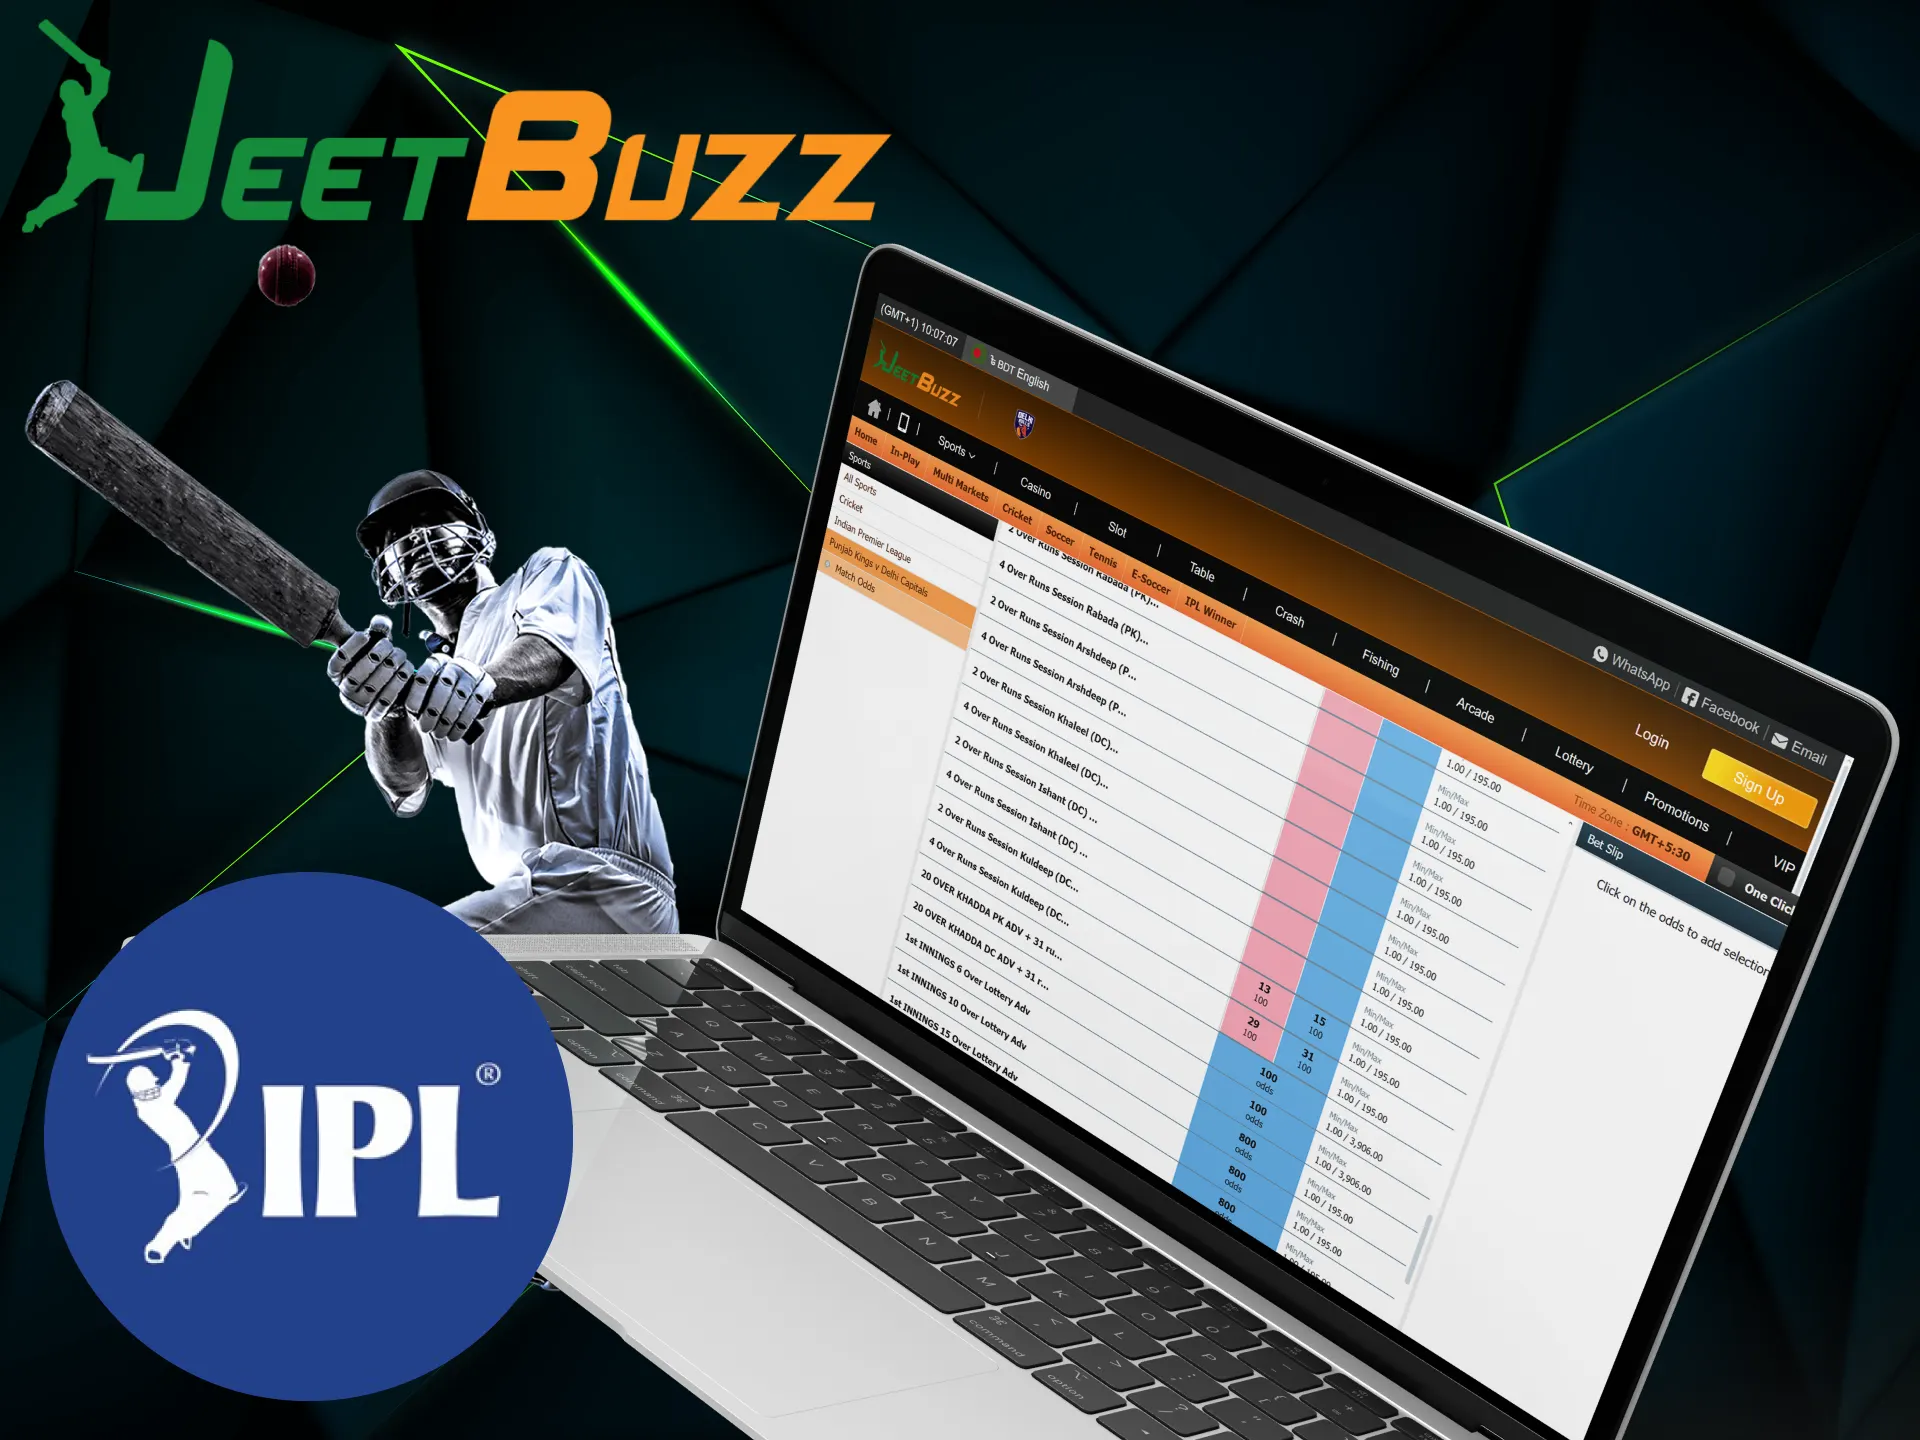 Take advantage of IPL betting tips and strategies to increase your chances of winning at JeetBuzz.